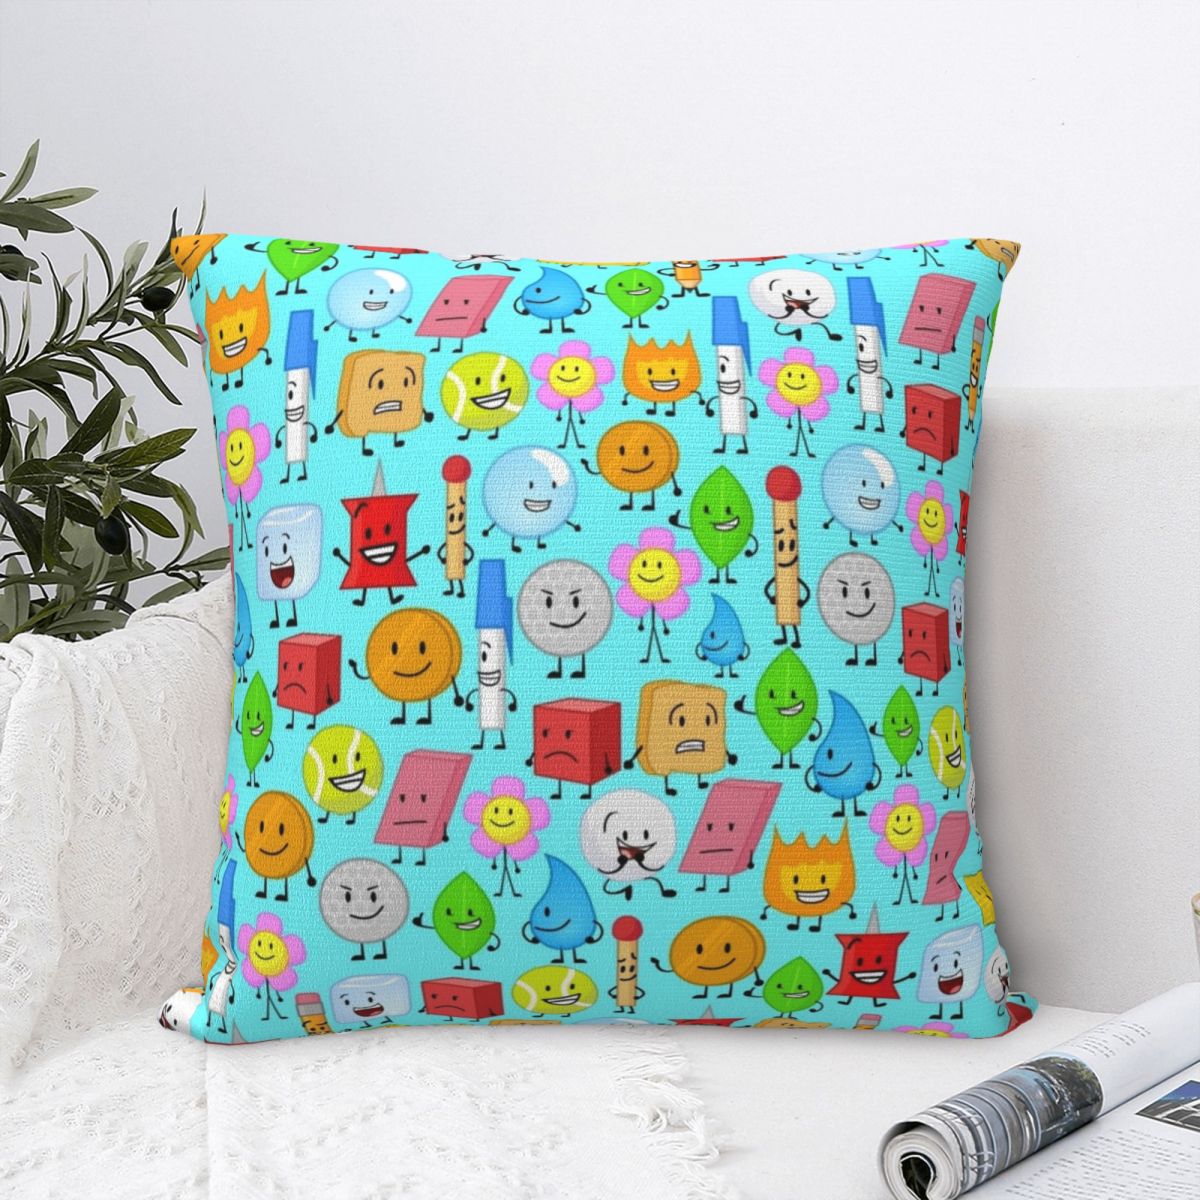 Bfdi Square Pillowcase Cushion Cover Comfort Pillow Case Polyester Throw Pillow cover For Home Sofa Living - BFDI Plush